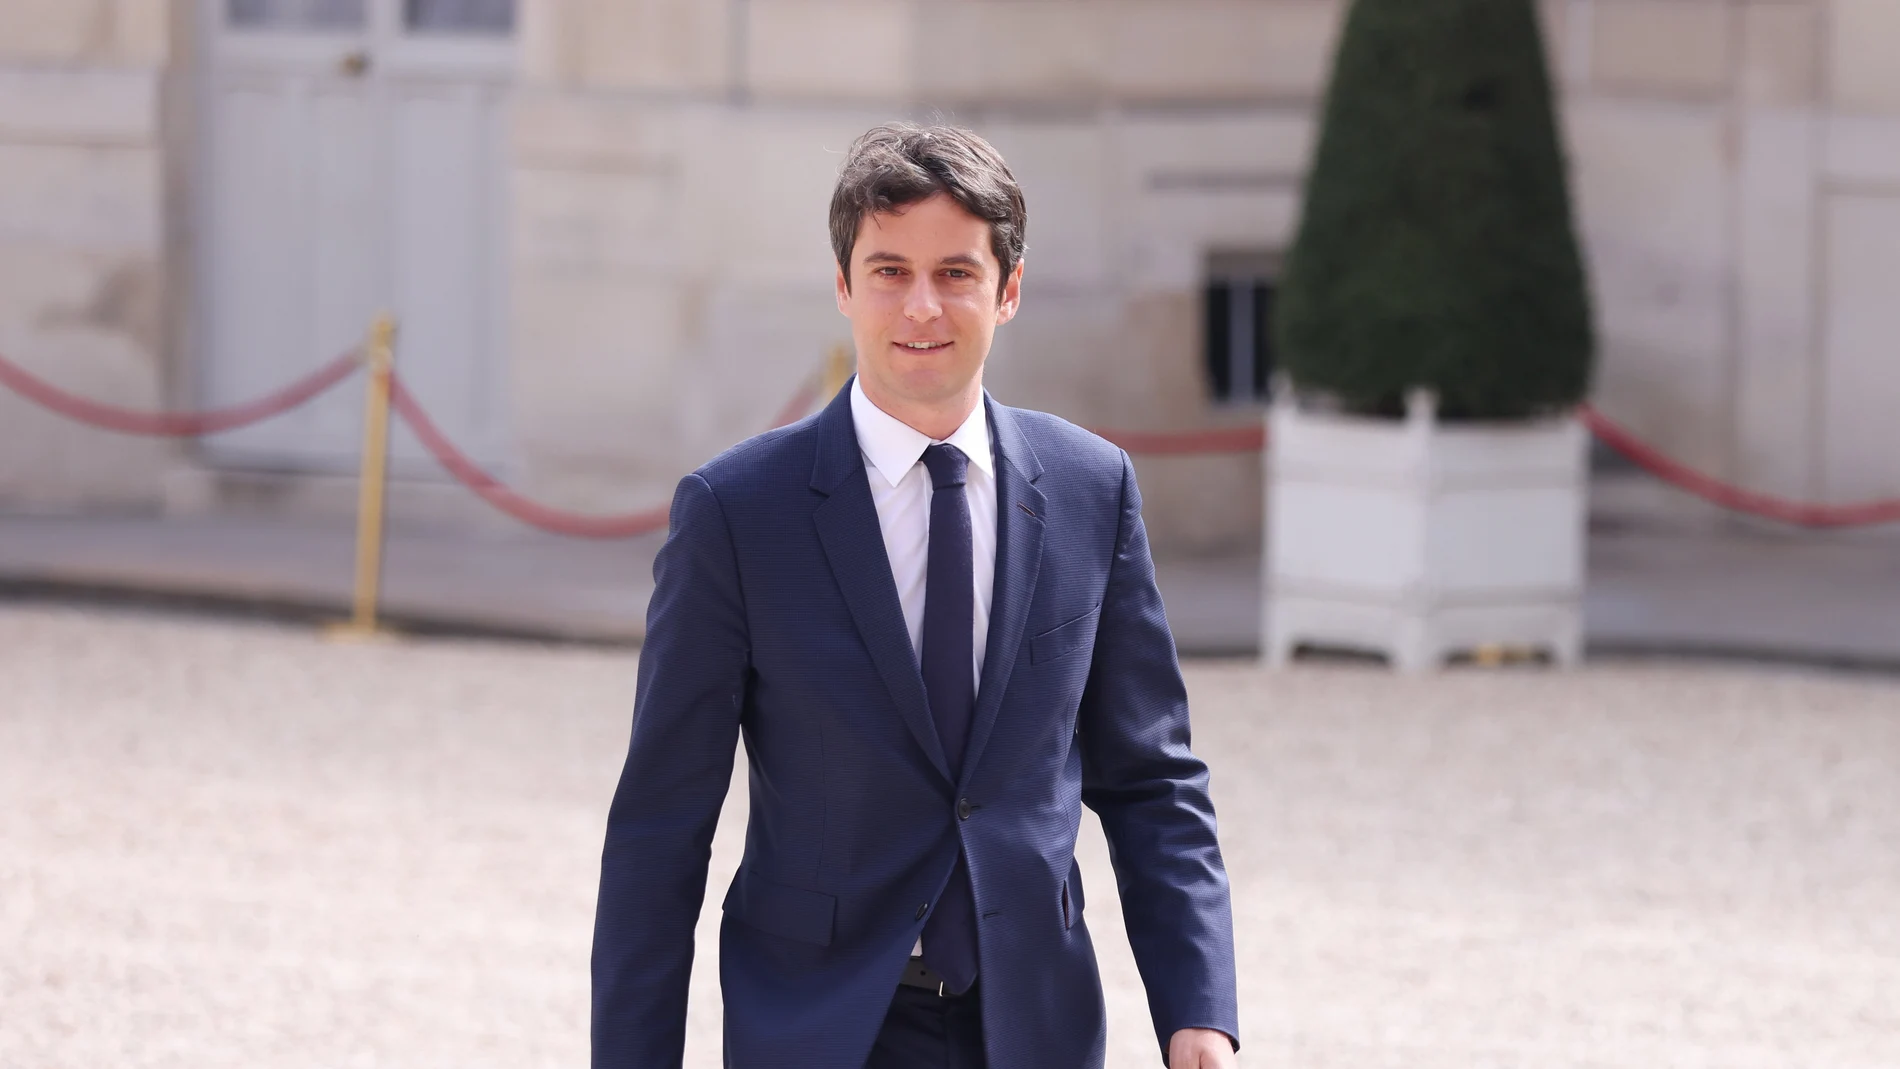 This file photo taken on May 7, 2022 shows Gabriel Attal at the Elysee Palace in Paris, France